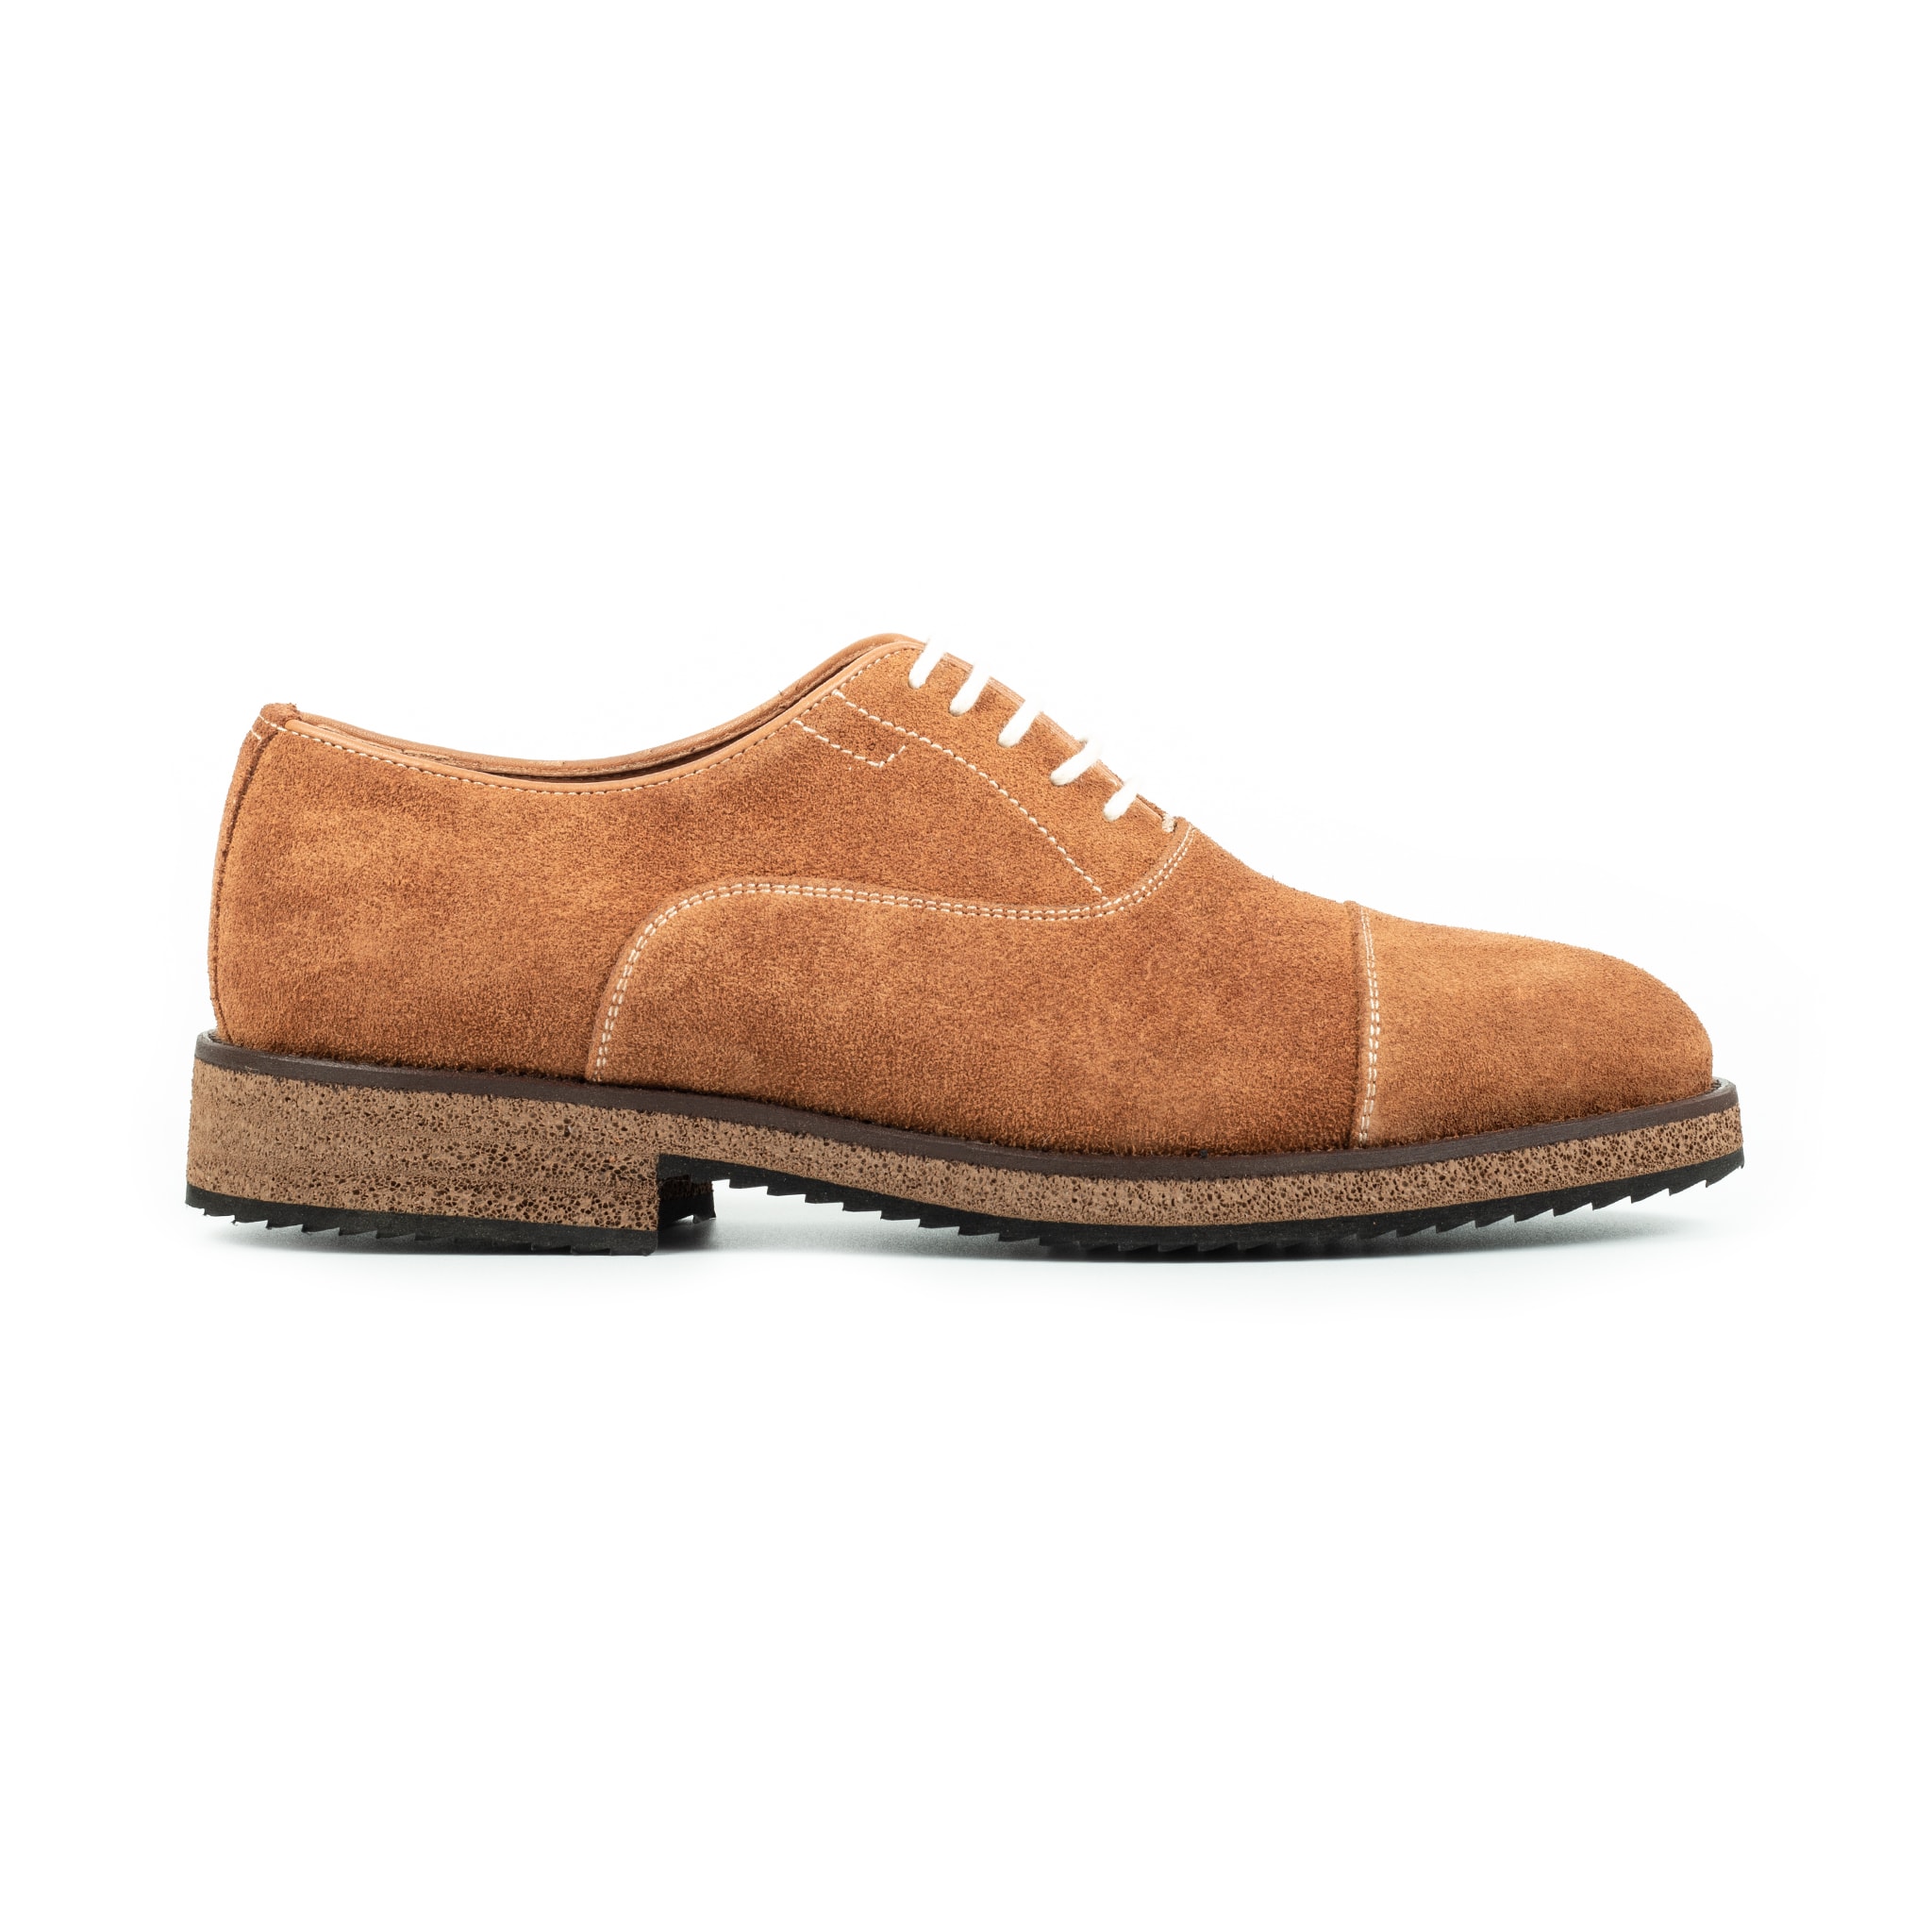 SKOLLIS | TOBACCO | Zerbay Handcrafted Leather Shoes